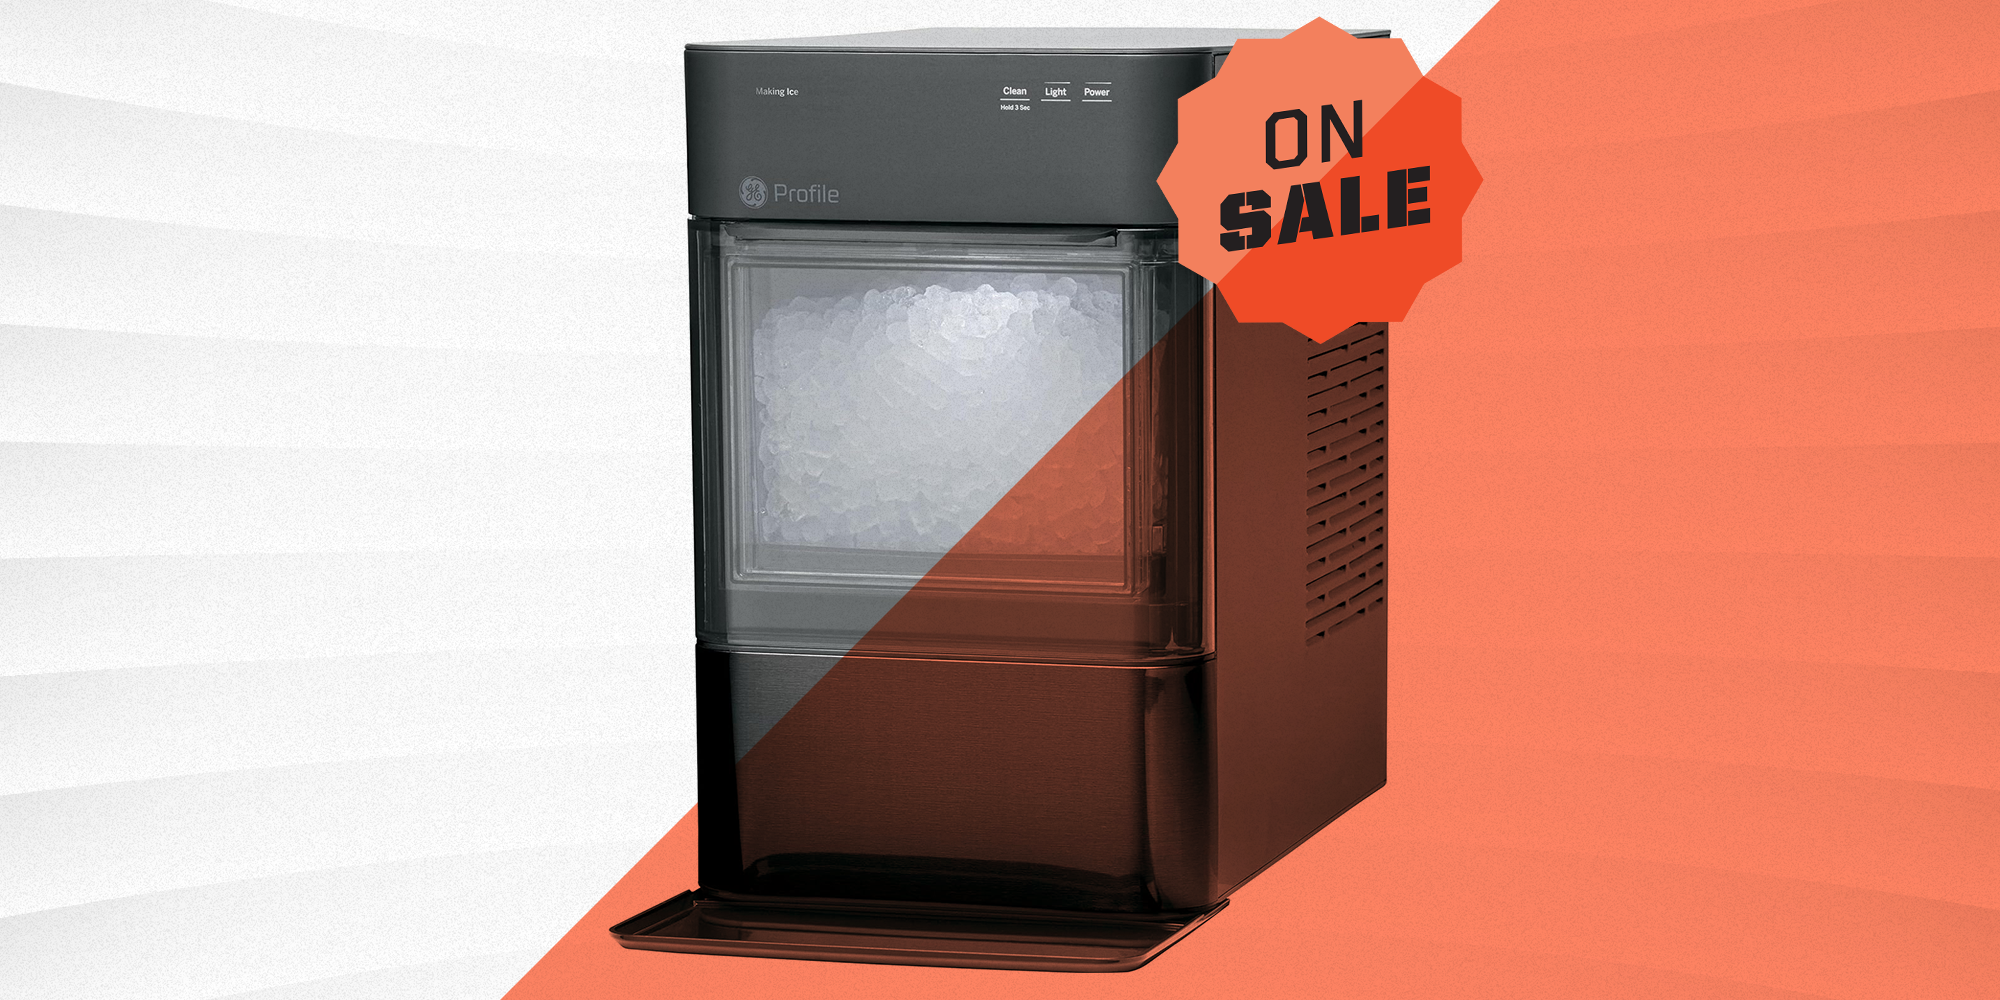 Score GE Profile Nugget Ice Makers During  Prime Day